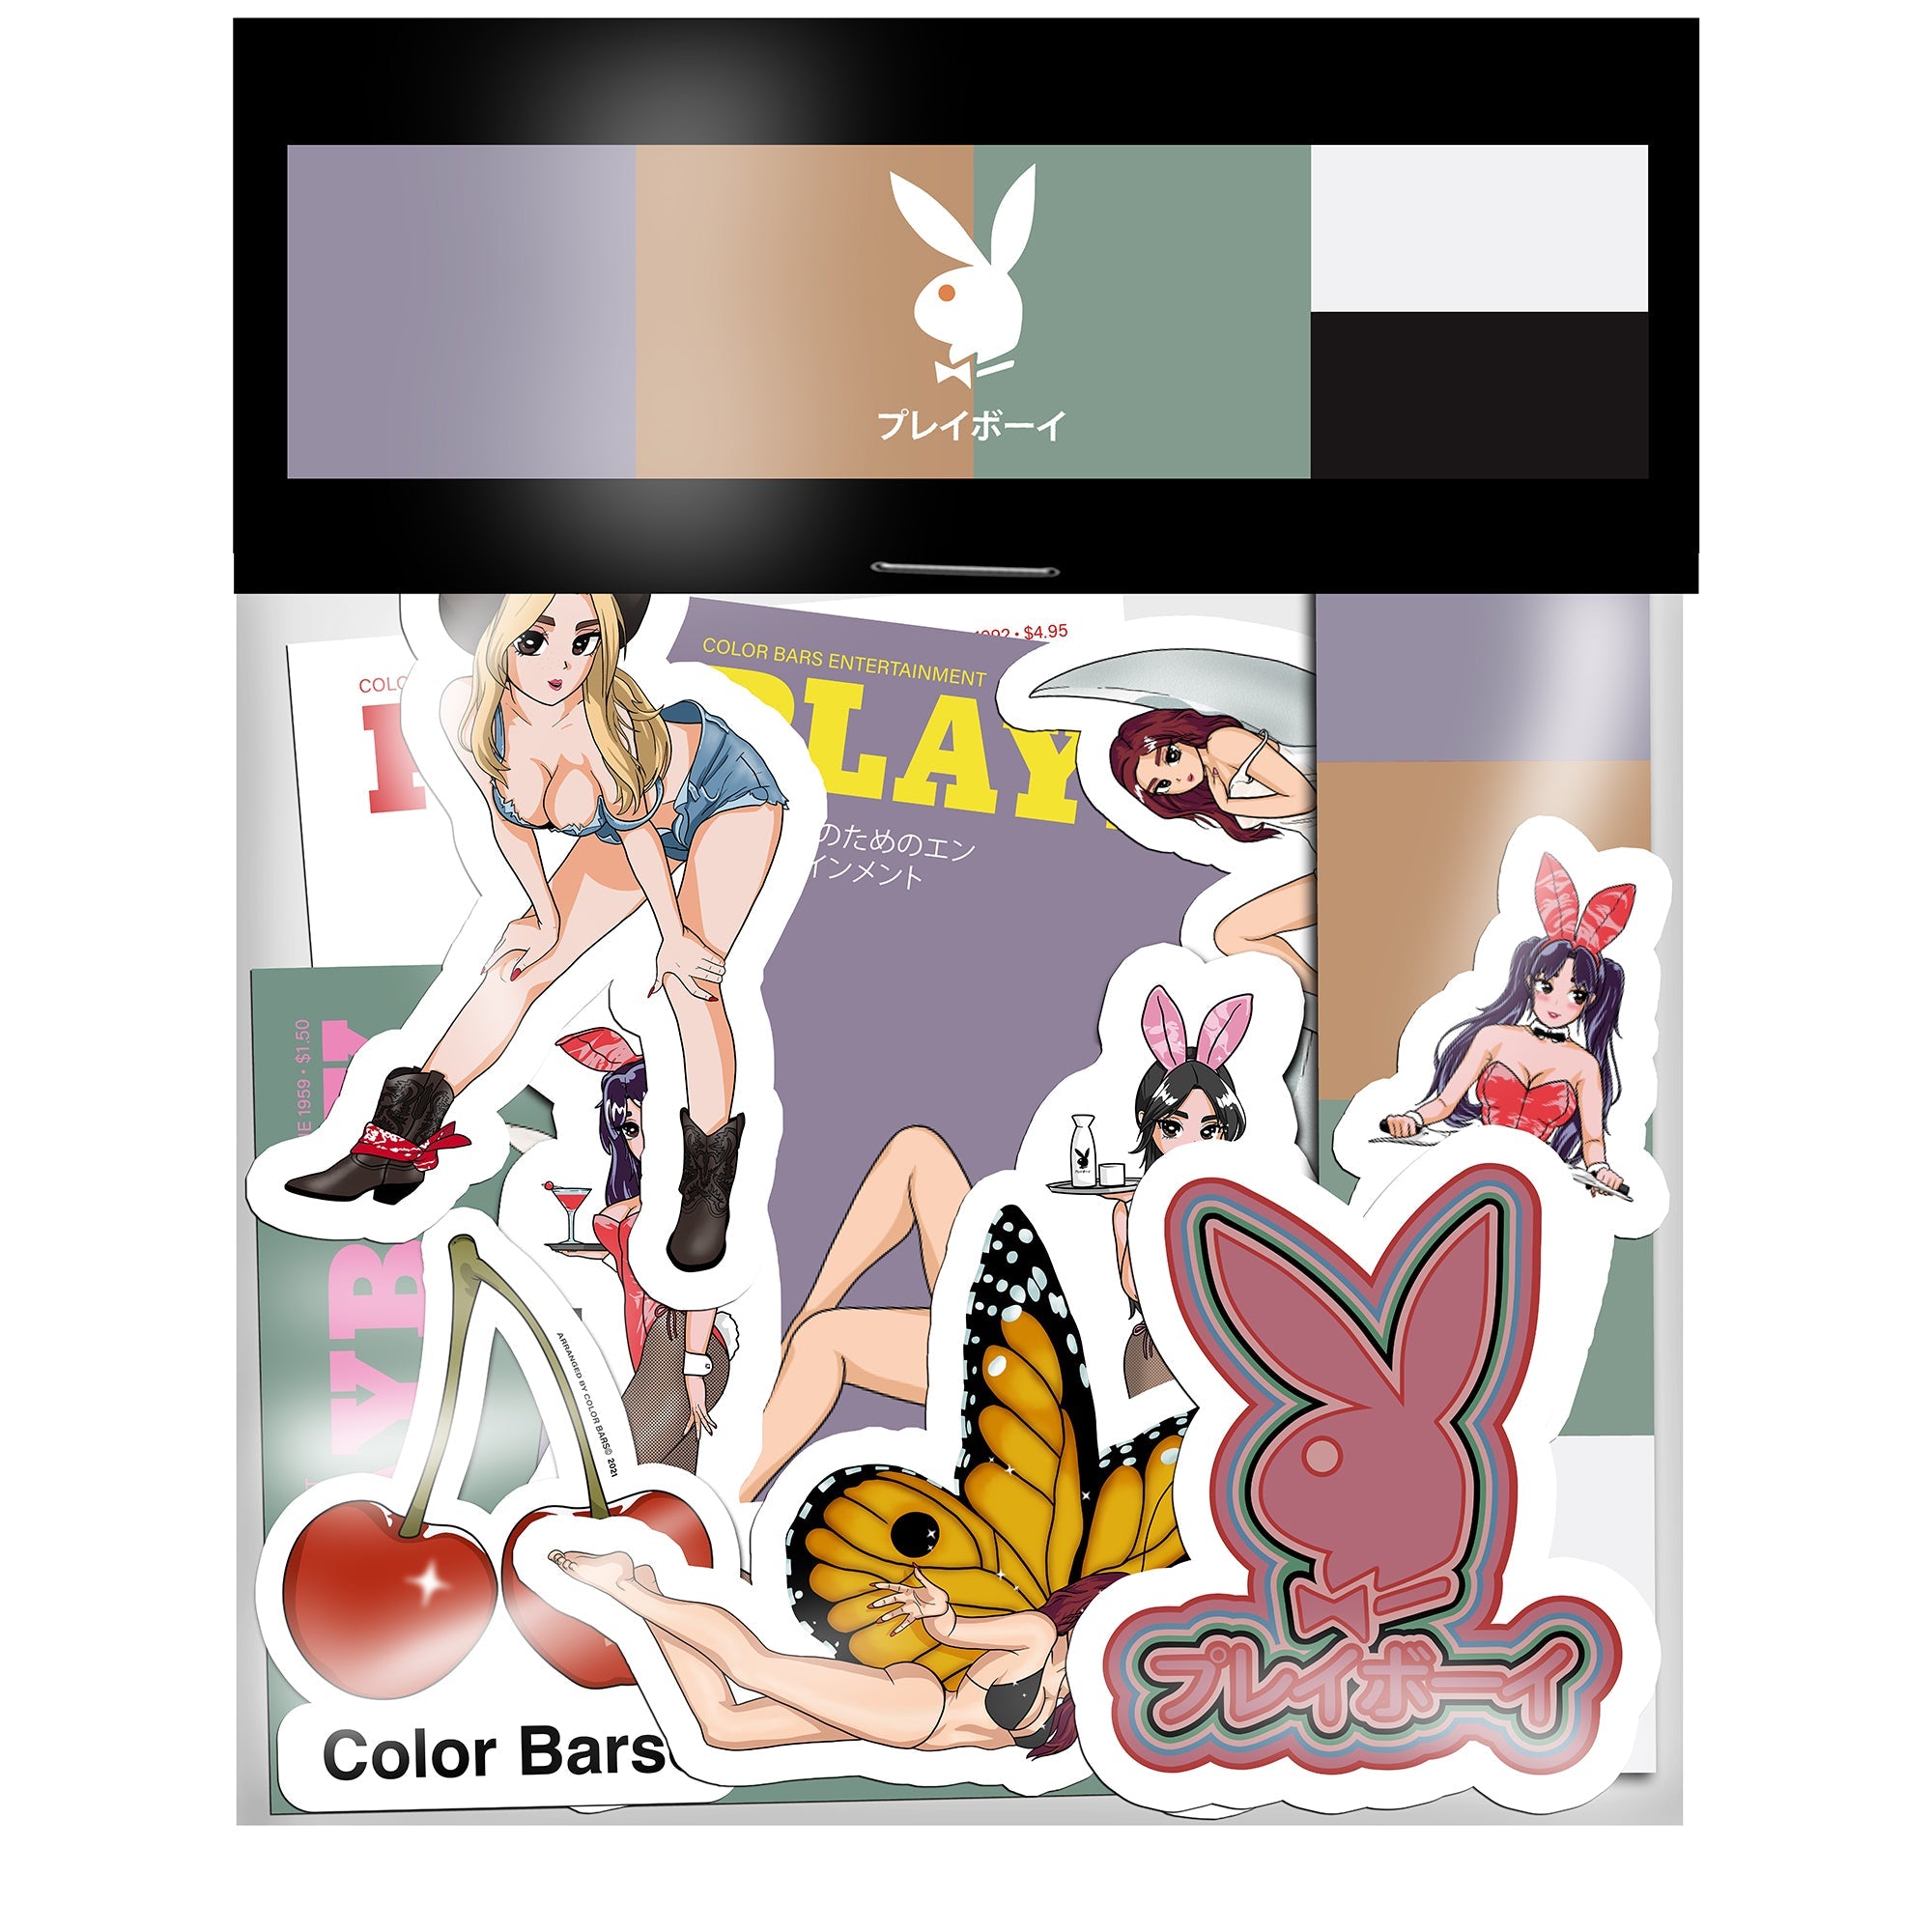 Stickers Pack: Iconic Tokyo Club 3.0 by Playboy